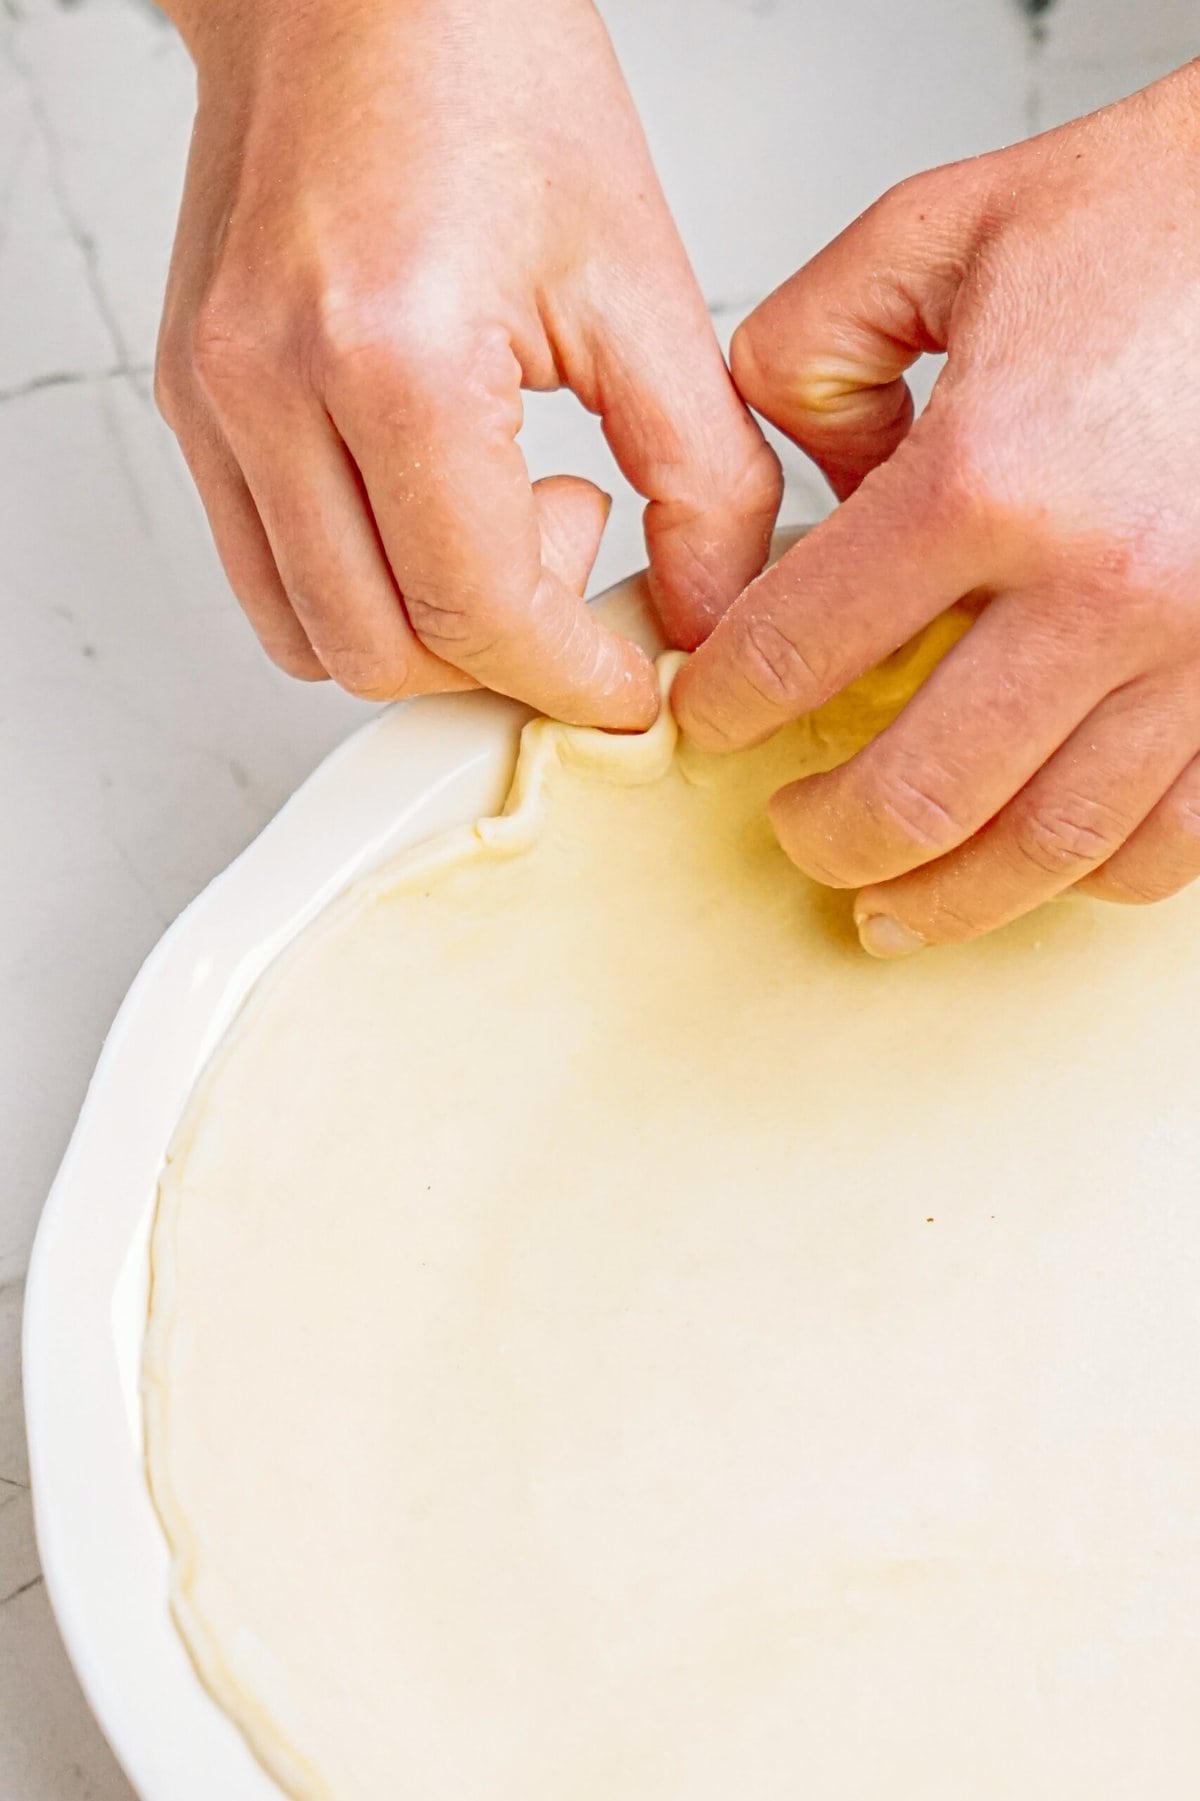 a person crimping the edge of the pie dough with their fingers